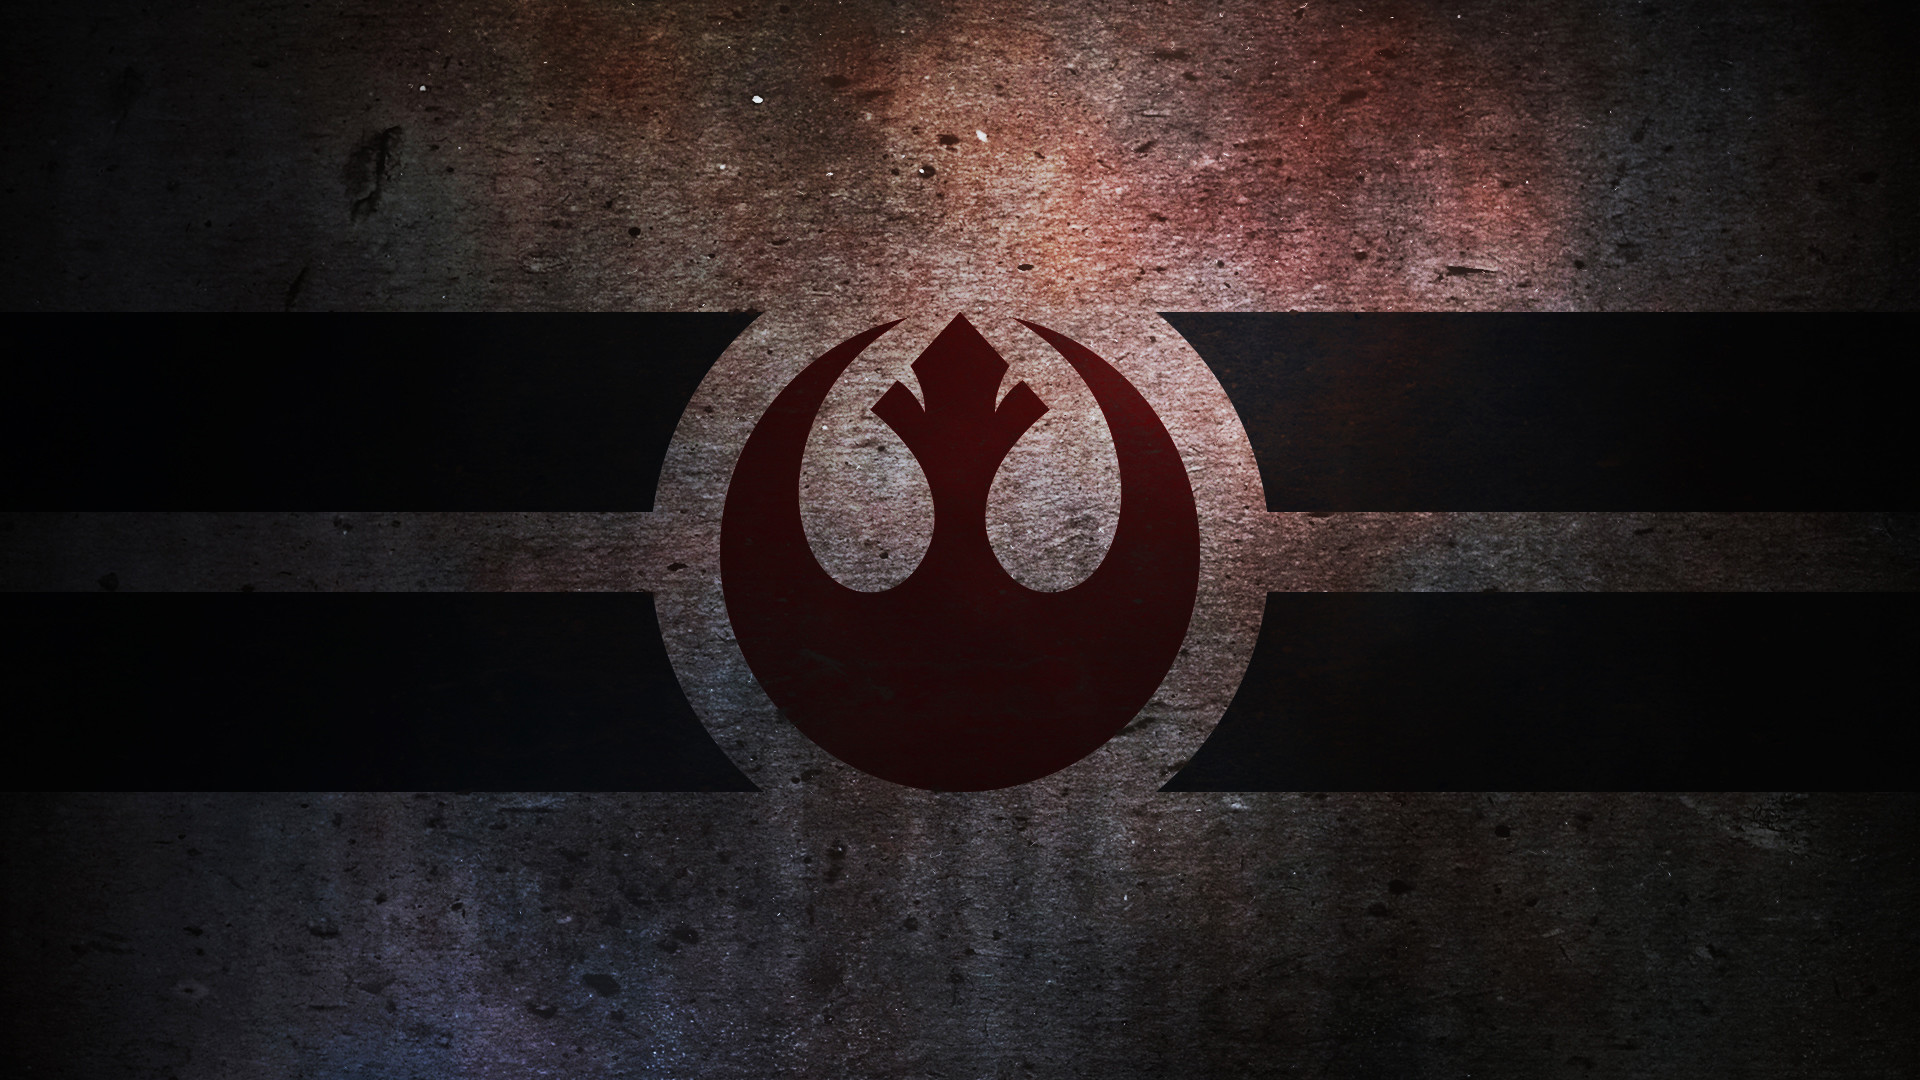 1920x1080 Star Wars Jedi Wallpapers For Iphone